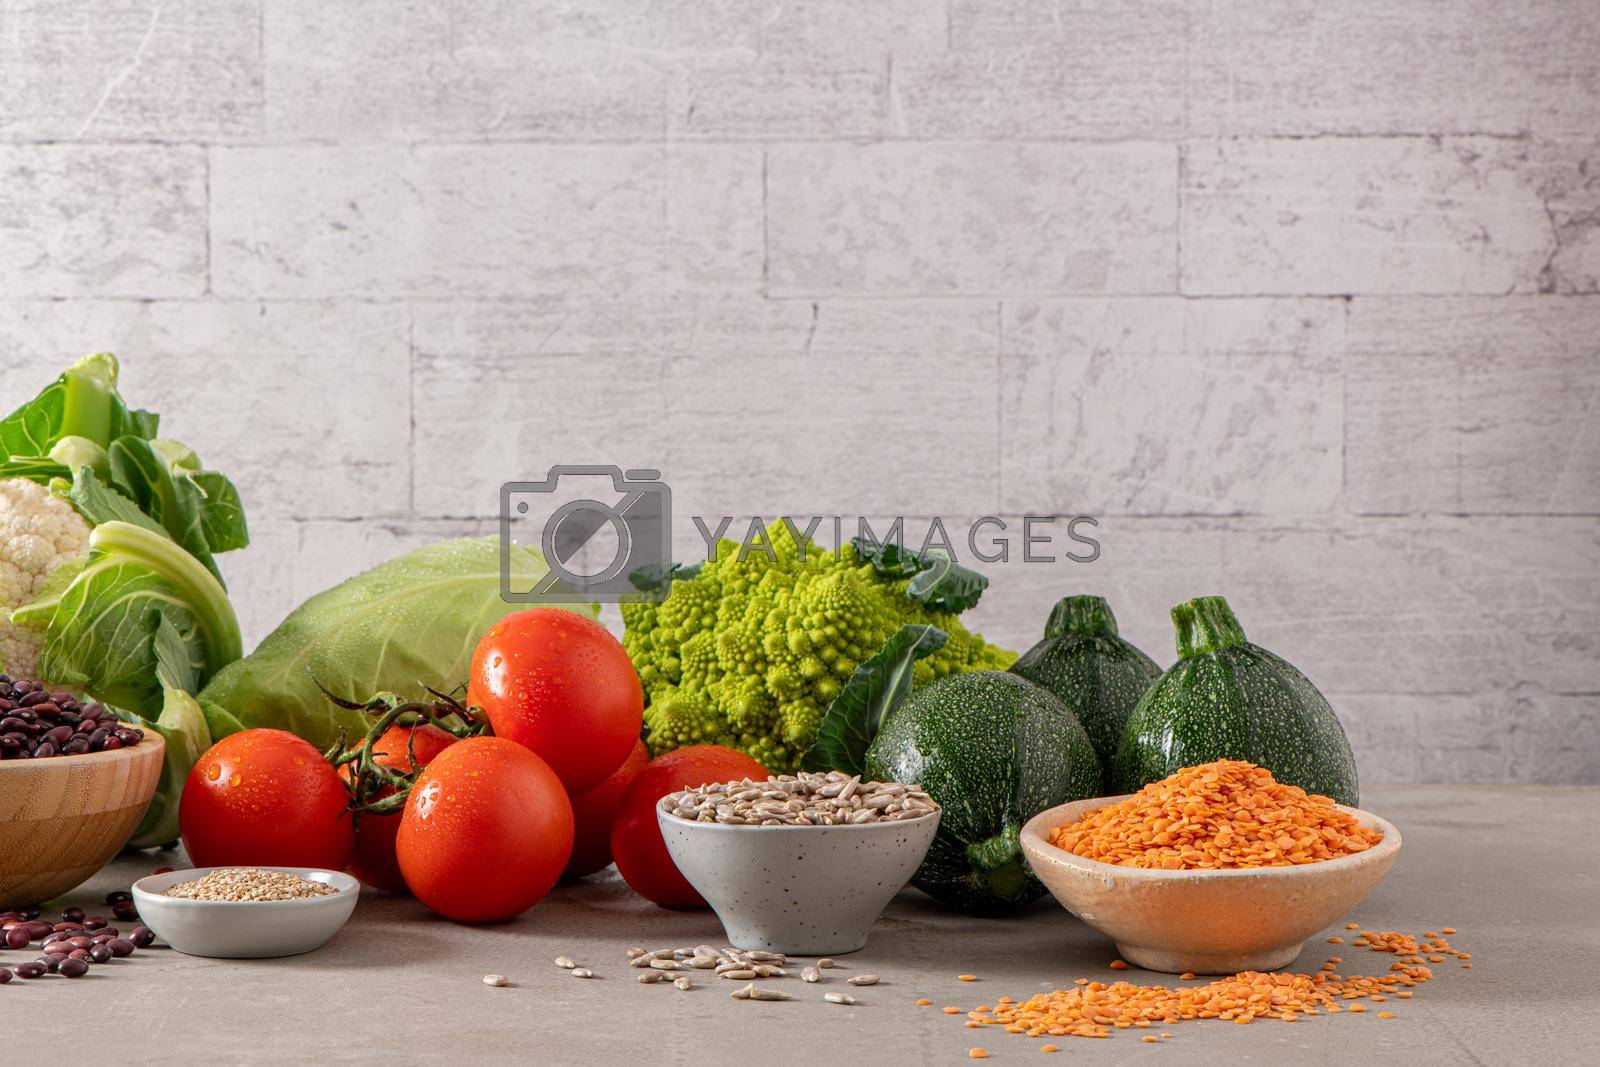 Healthy food selection with vegetables, seeds, superfood, cereals on kitchen countertop.